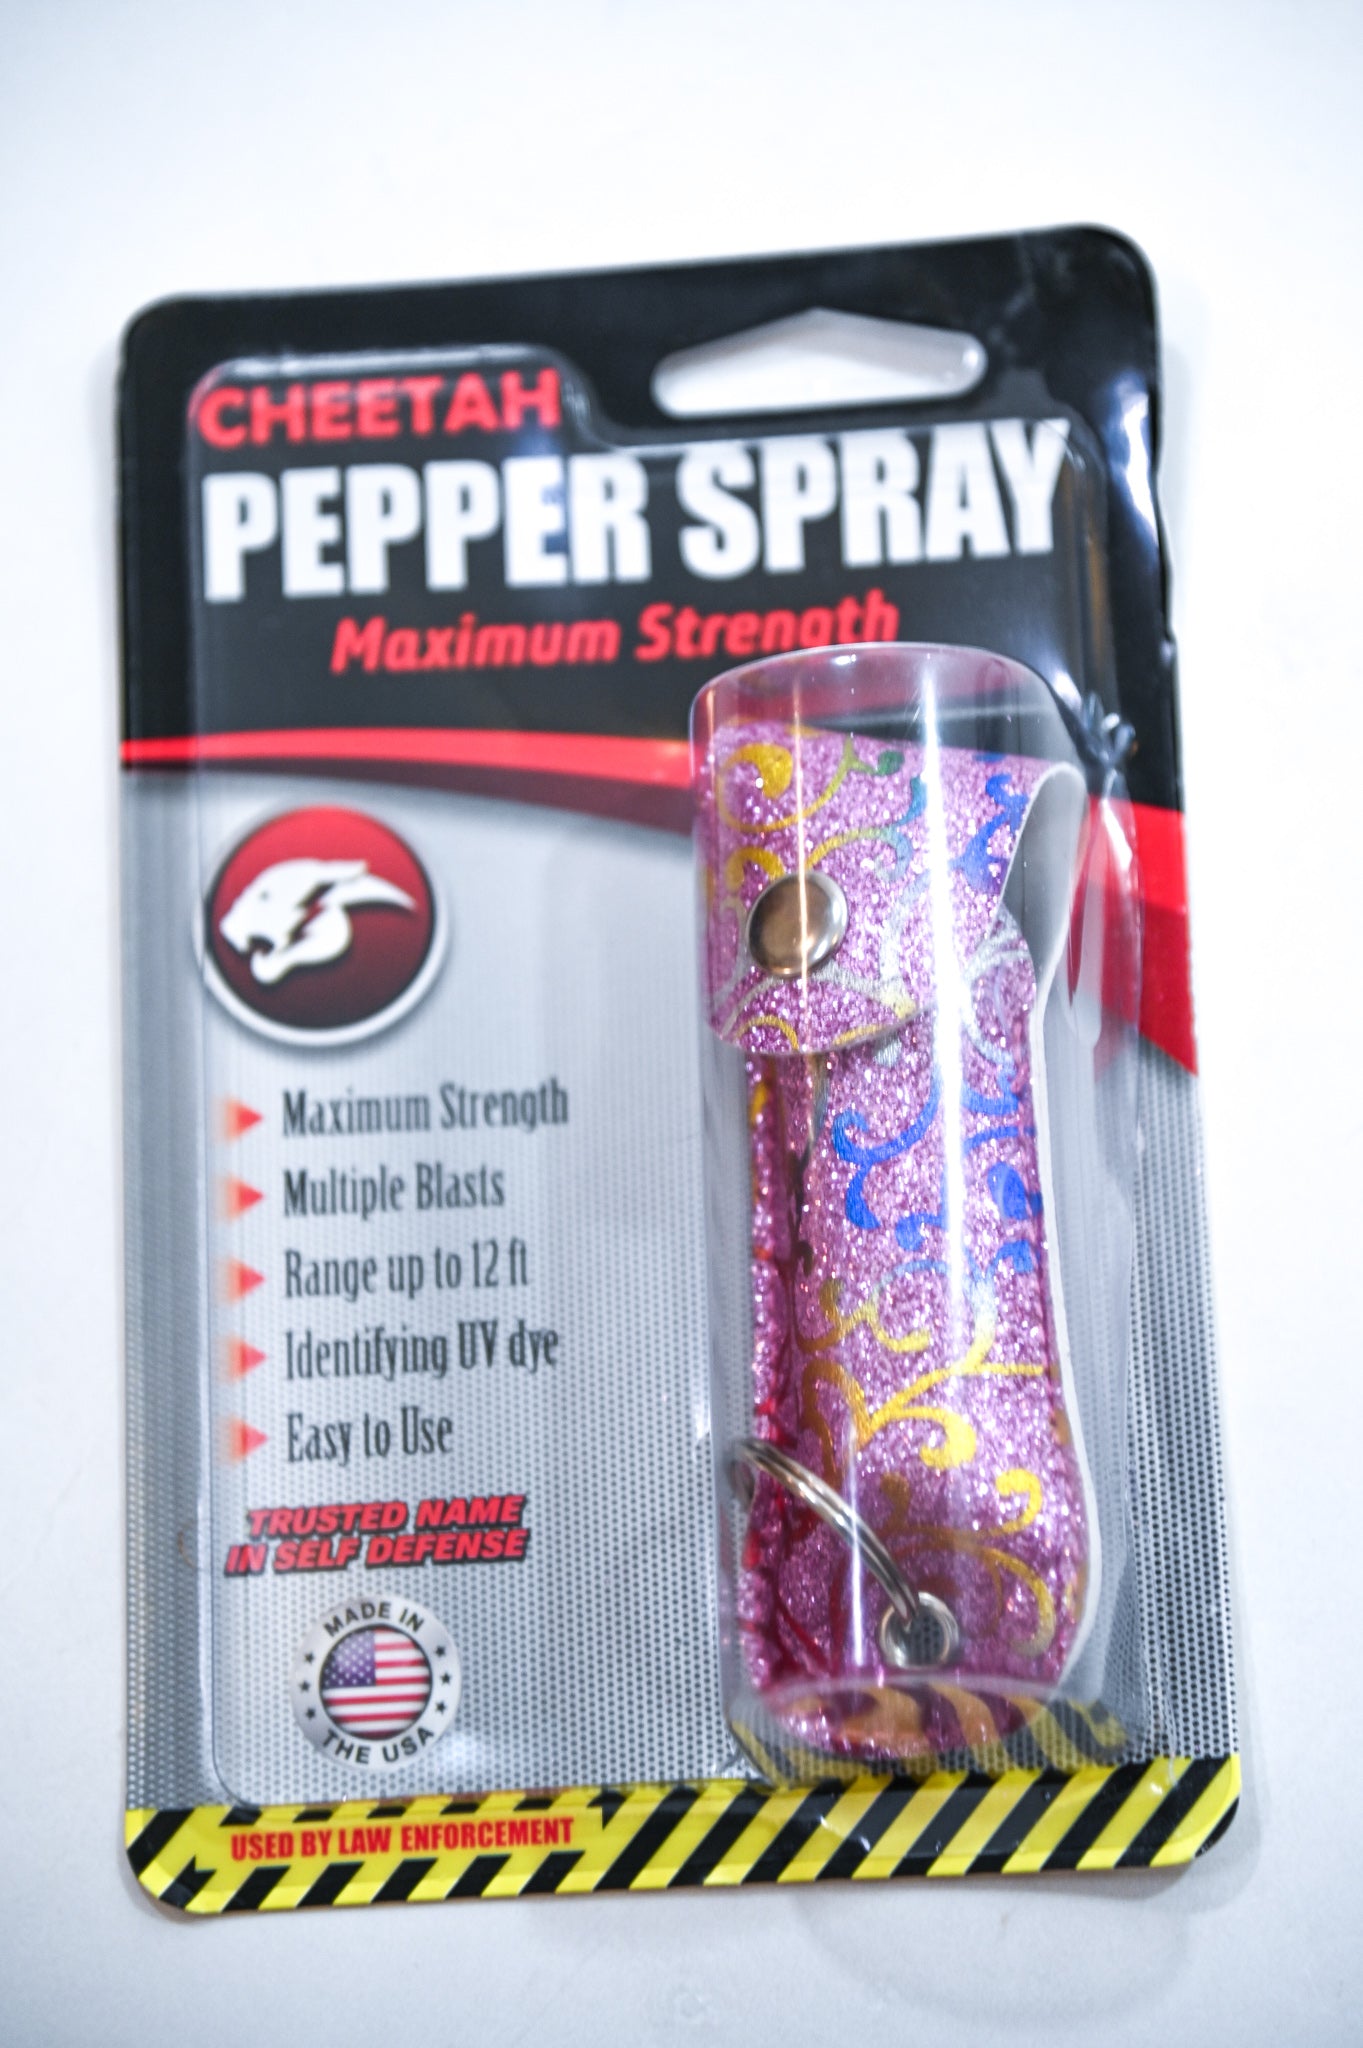 Powerful Pepper Spray for Personal Safety | Compact Self-Defense Solution